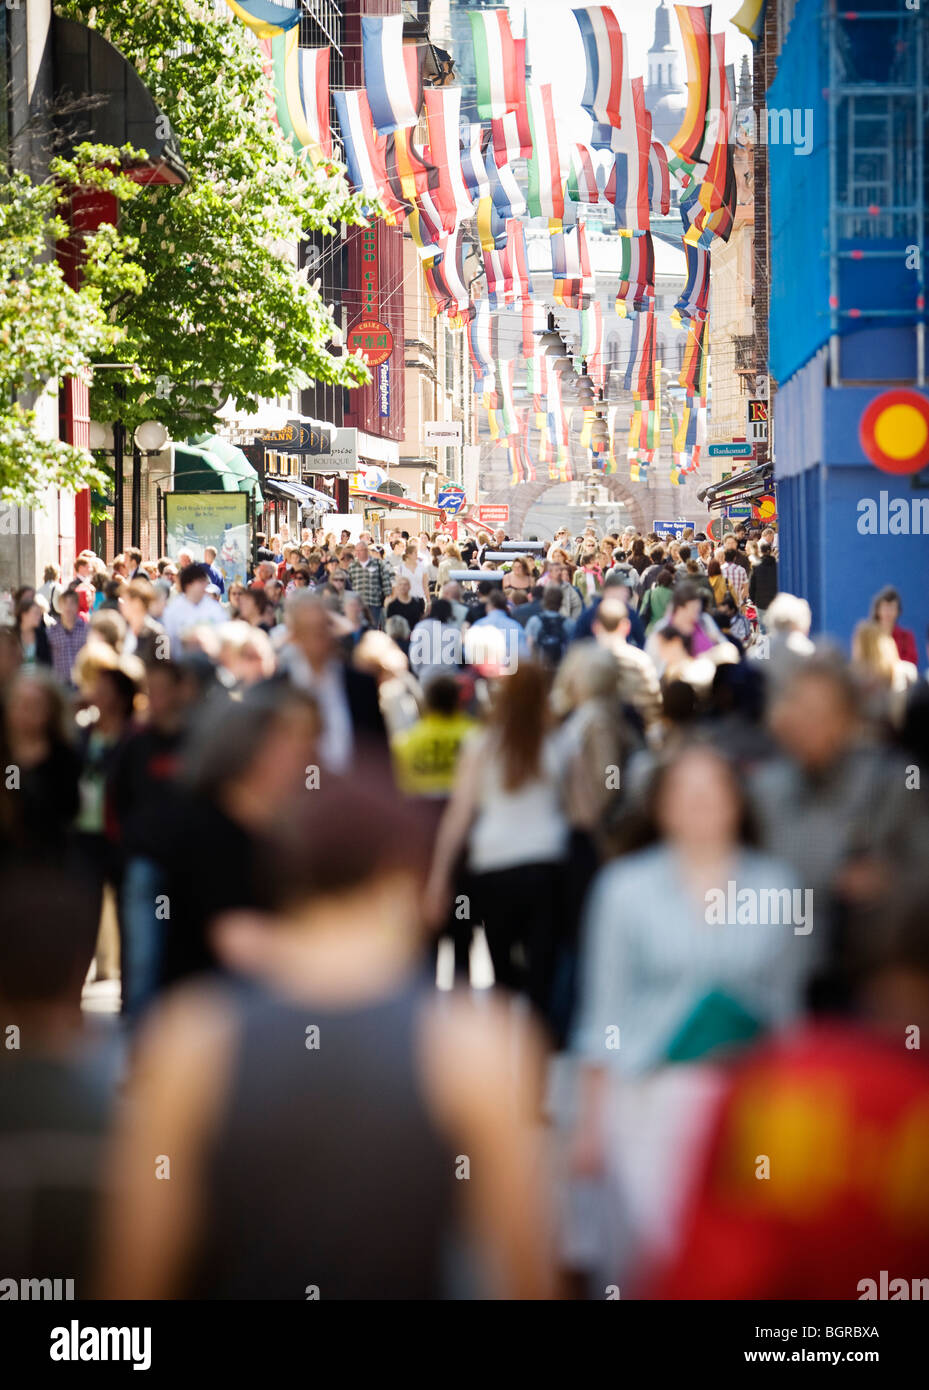 A crowd of people in the street, Stockholm, Sweden. Stock Photo